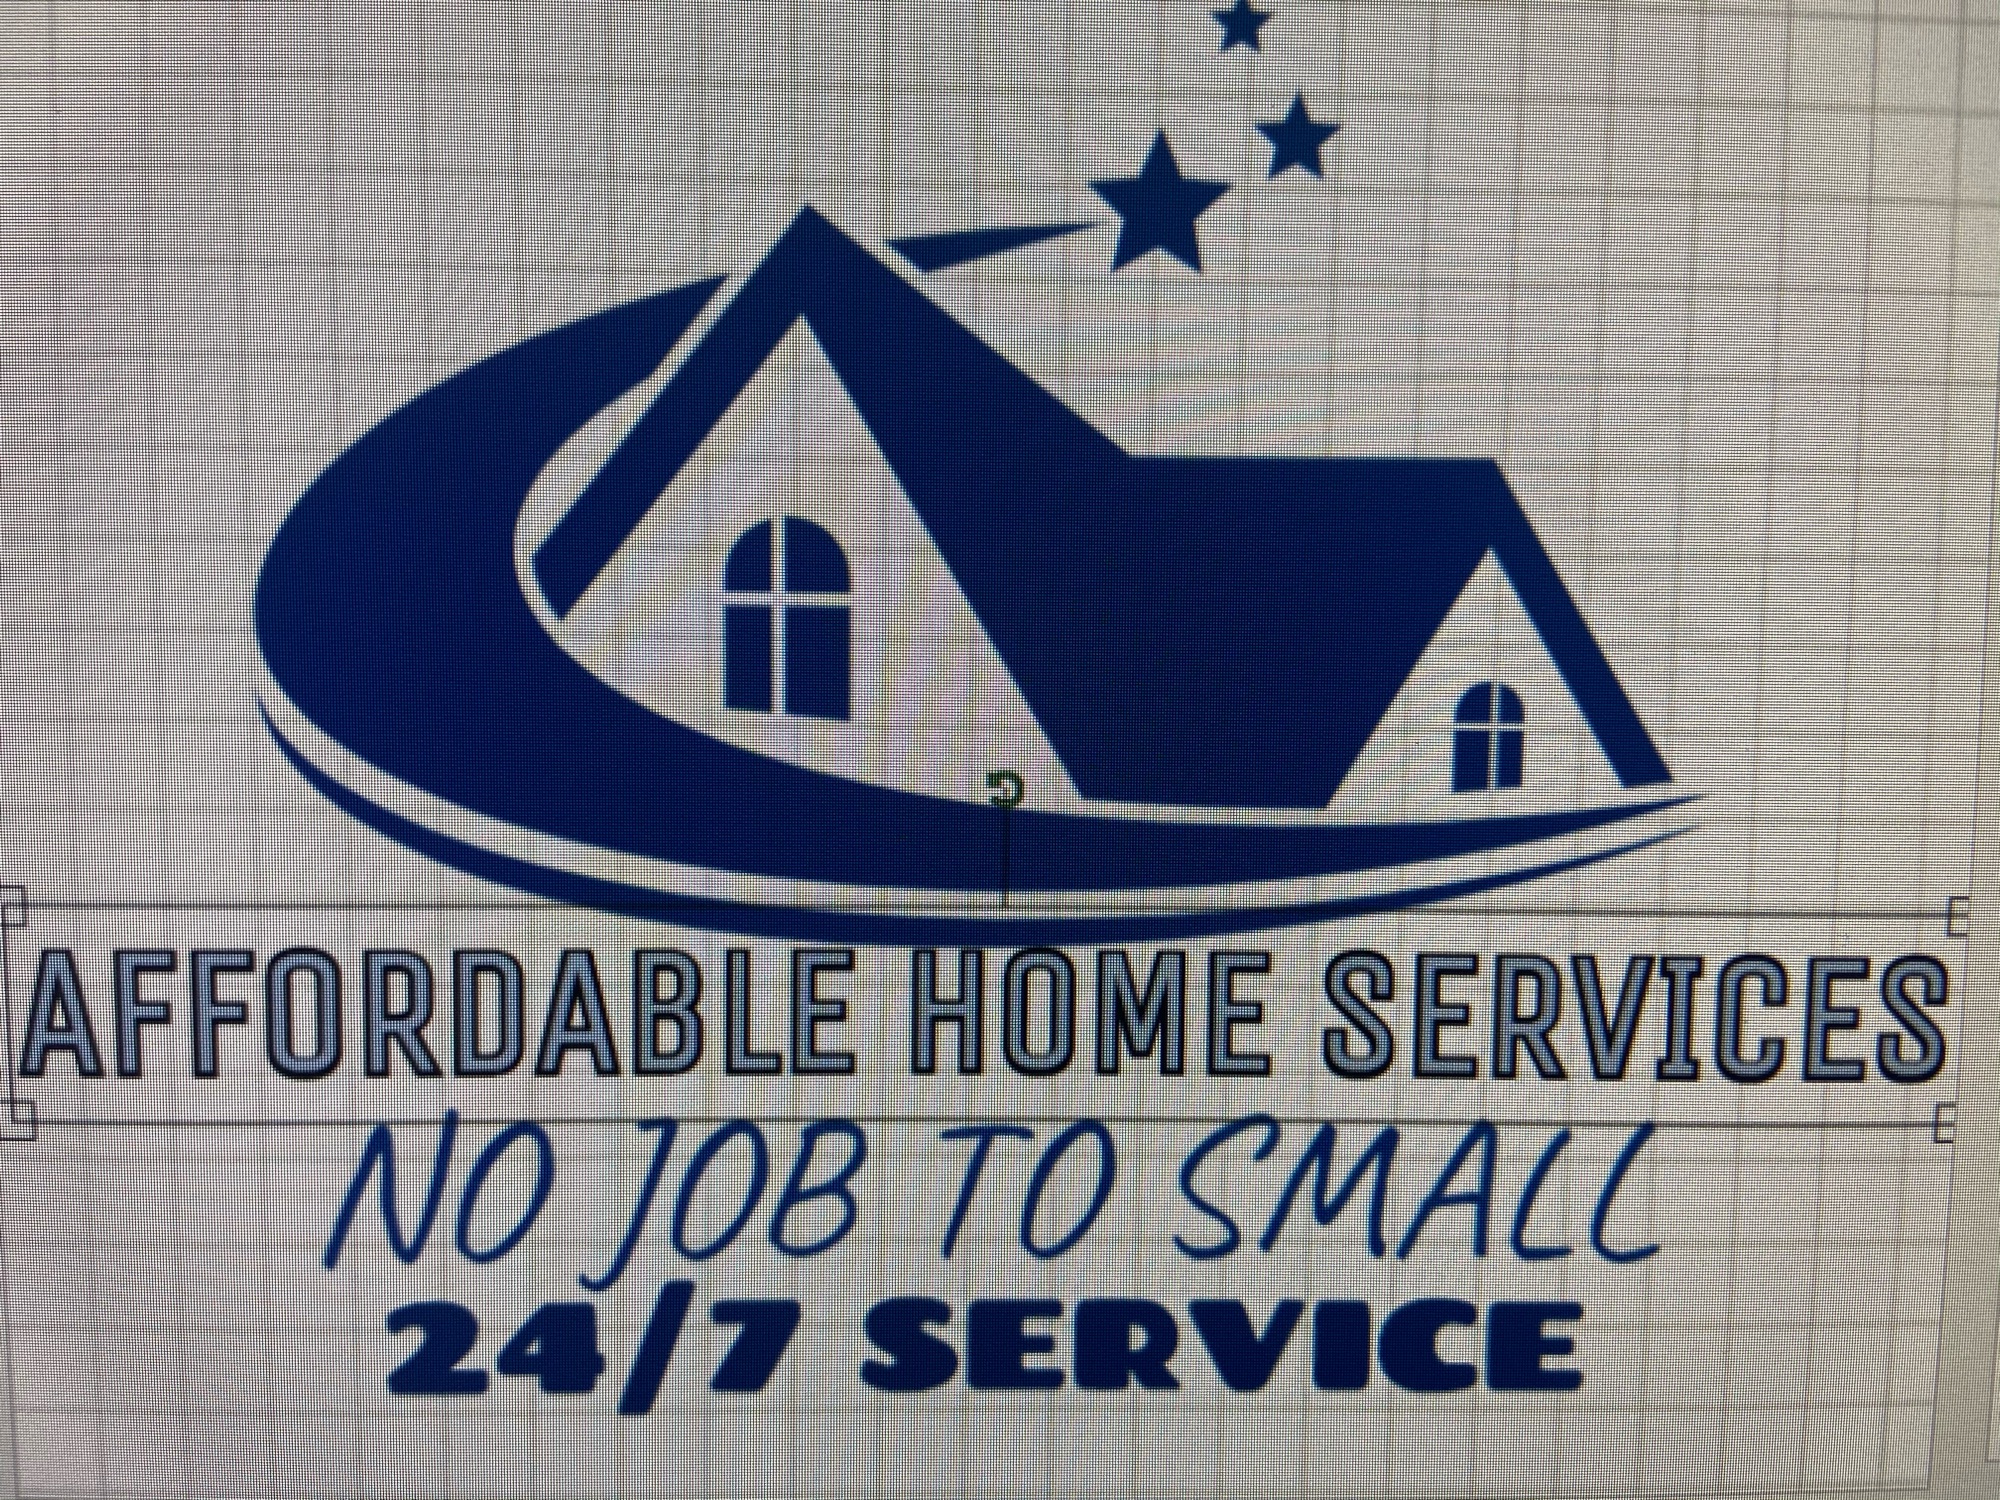 Affordable Home Services Logo